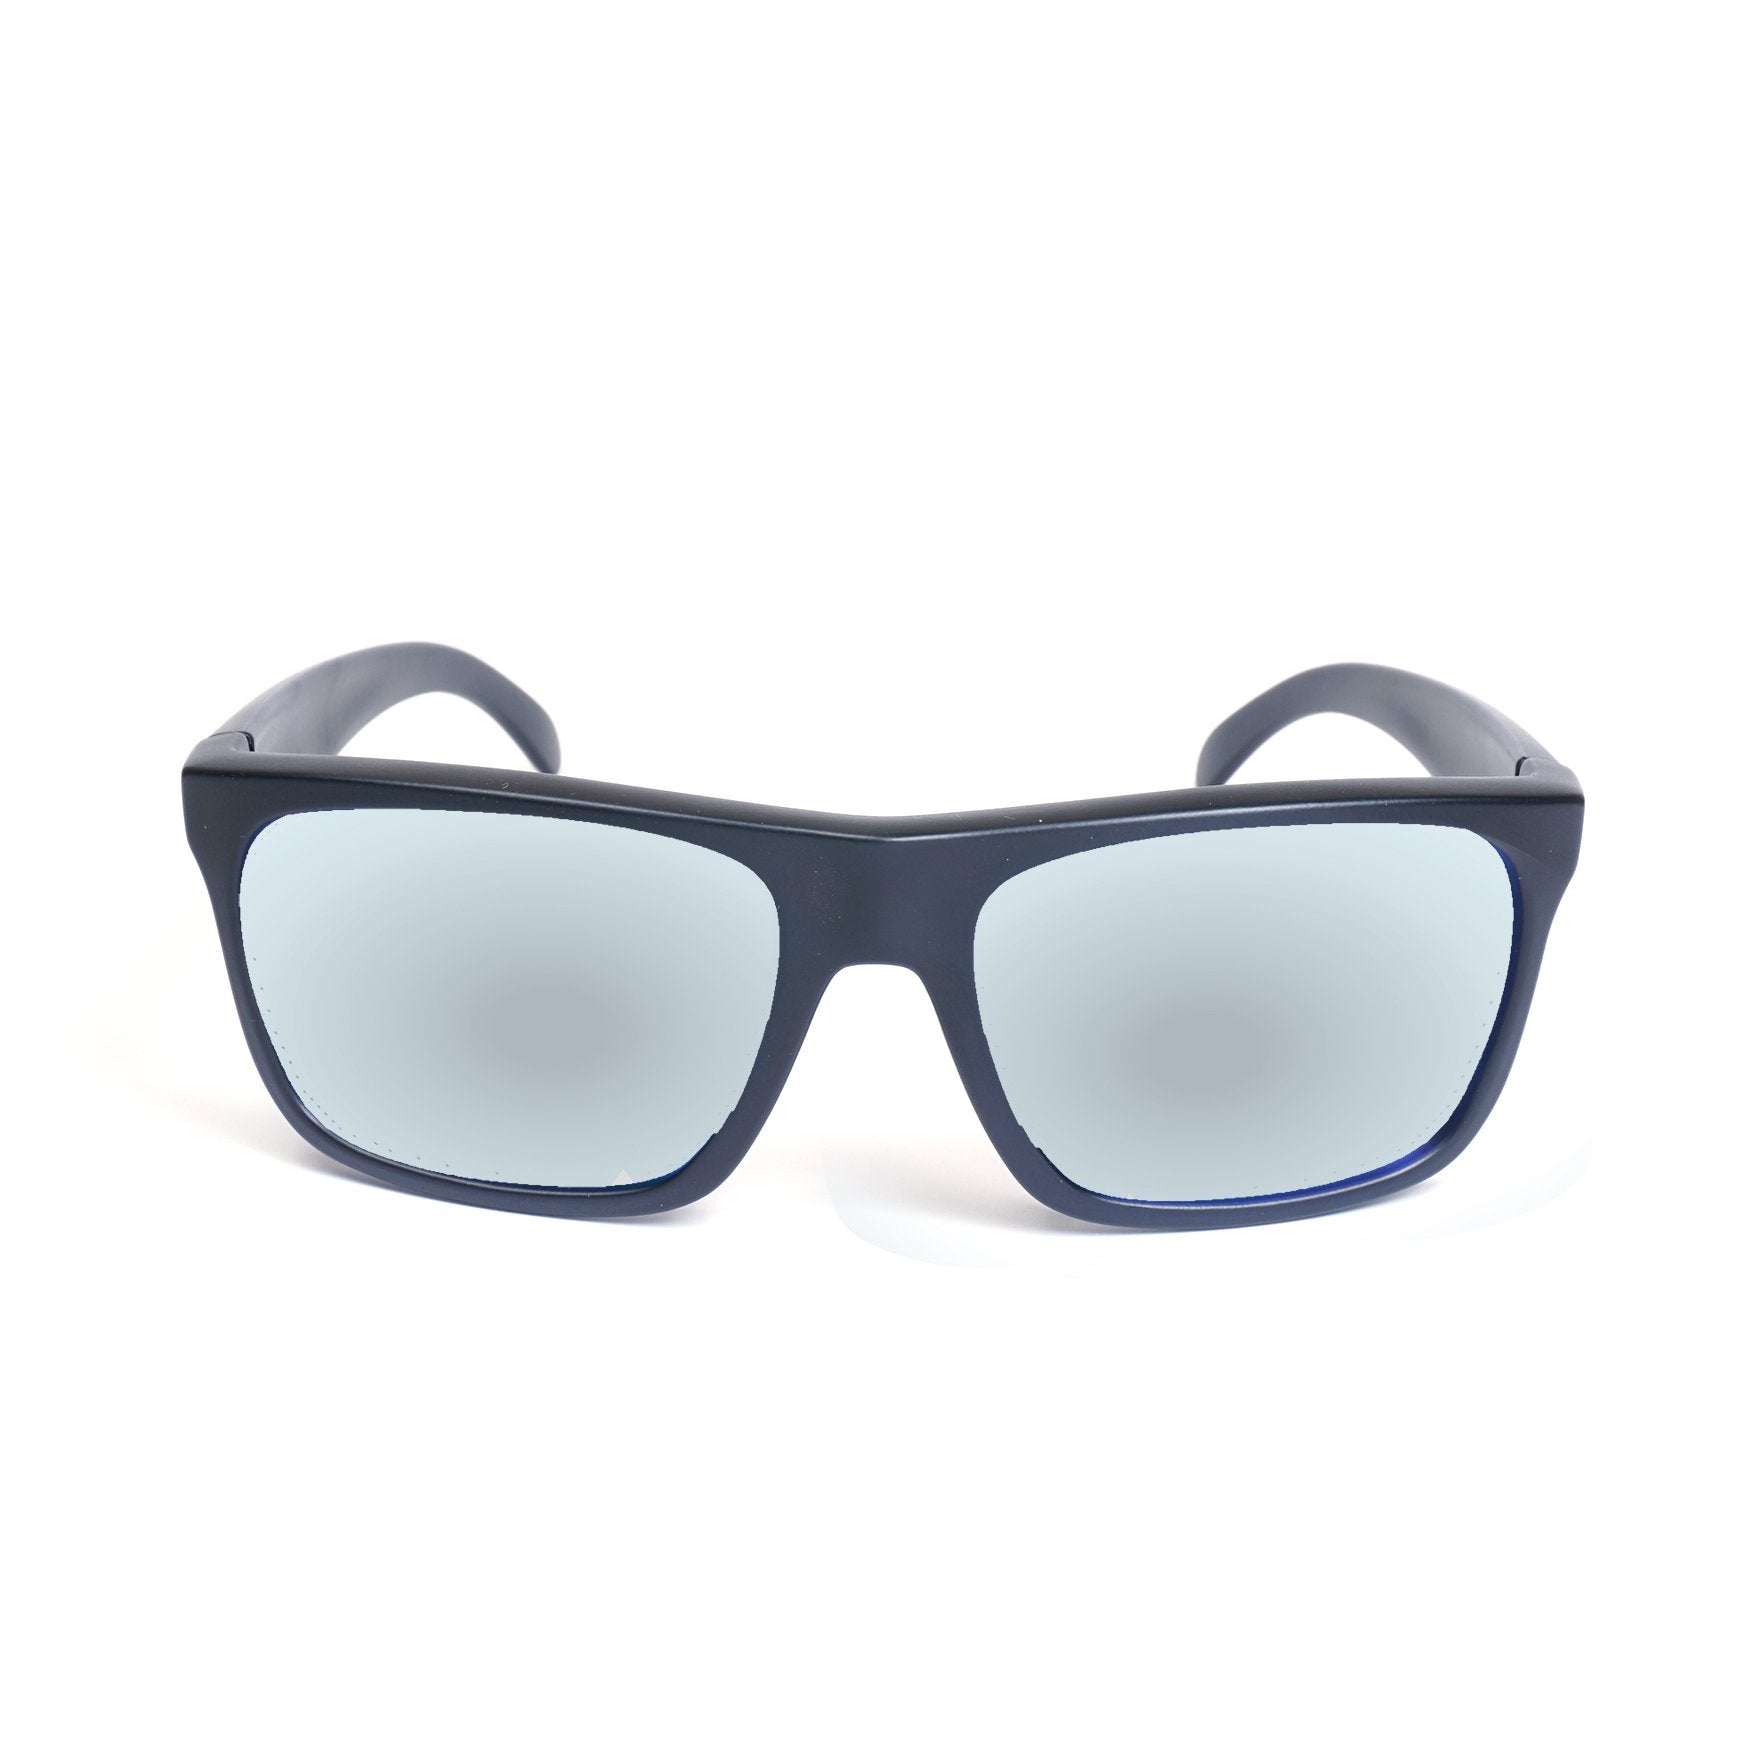 STAGE Cast Floating Sunglasses - Mirror Chrome Lens